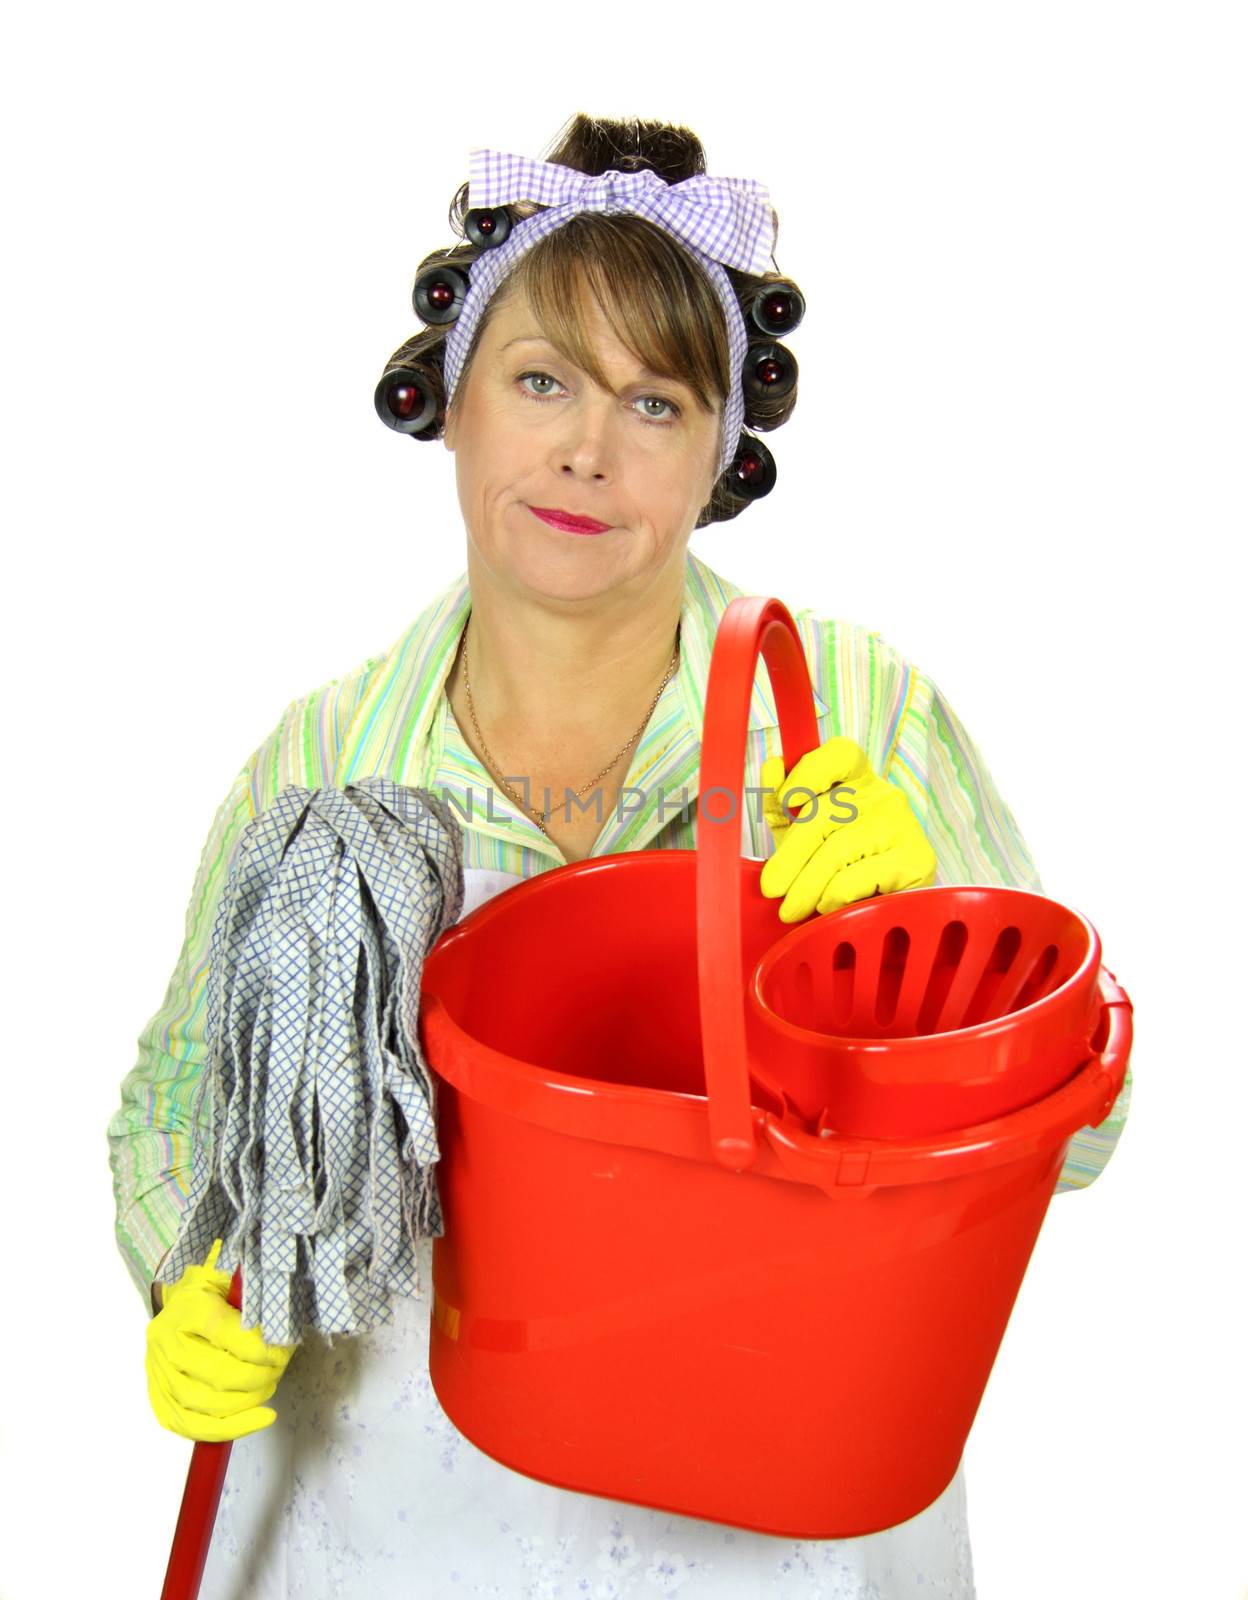 Frumpy unhappy middle aged housewife with a mop and bucket.